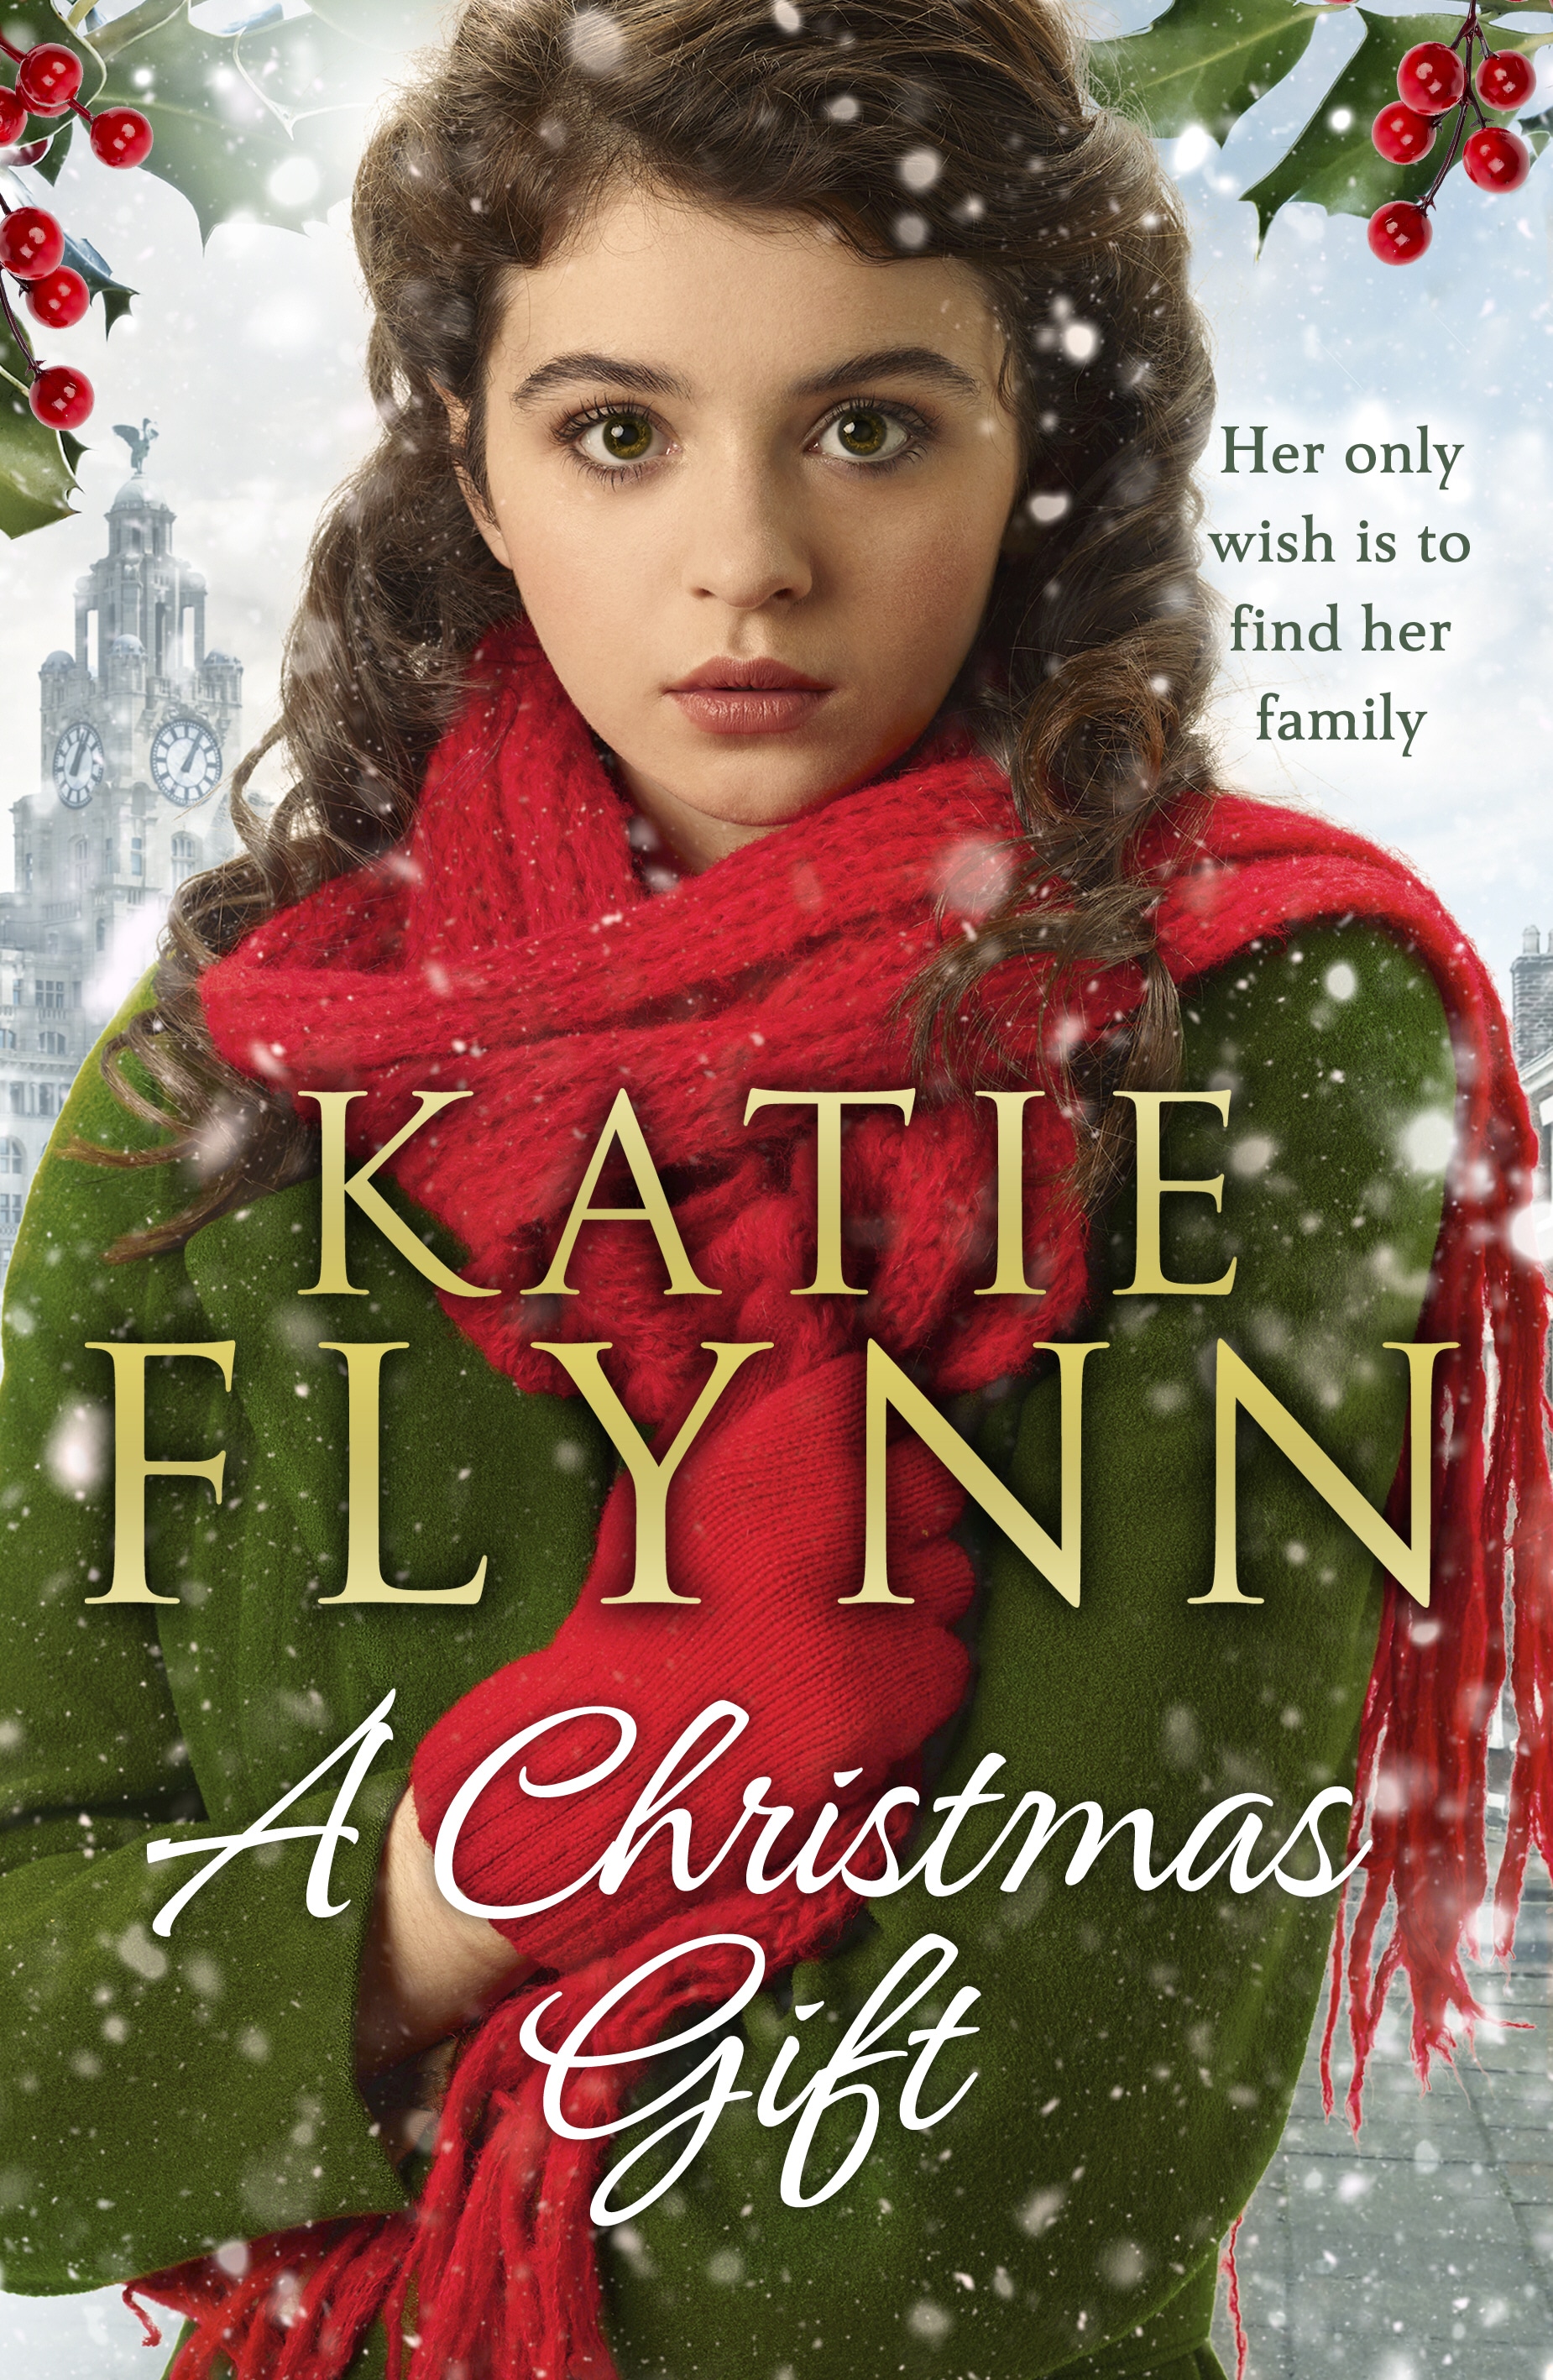 Book “A Christmas Gift” by Katie Flynn — October 17, 2019